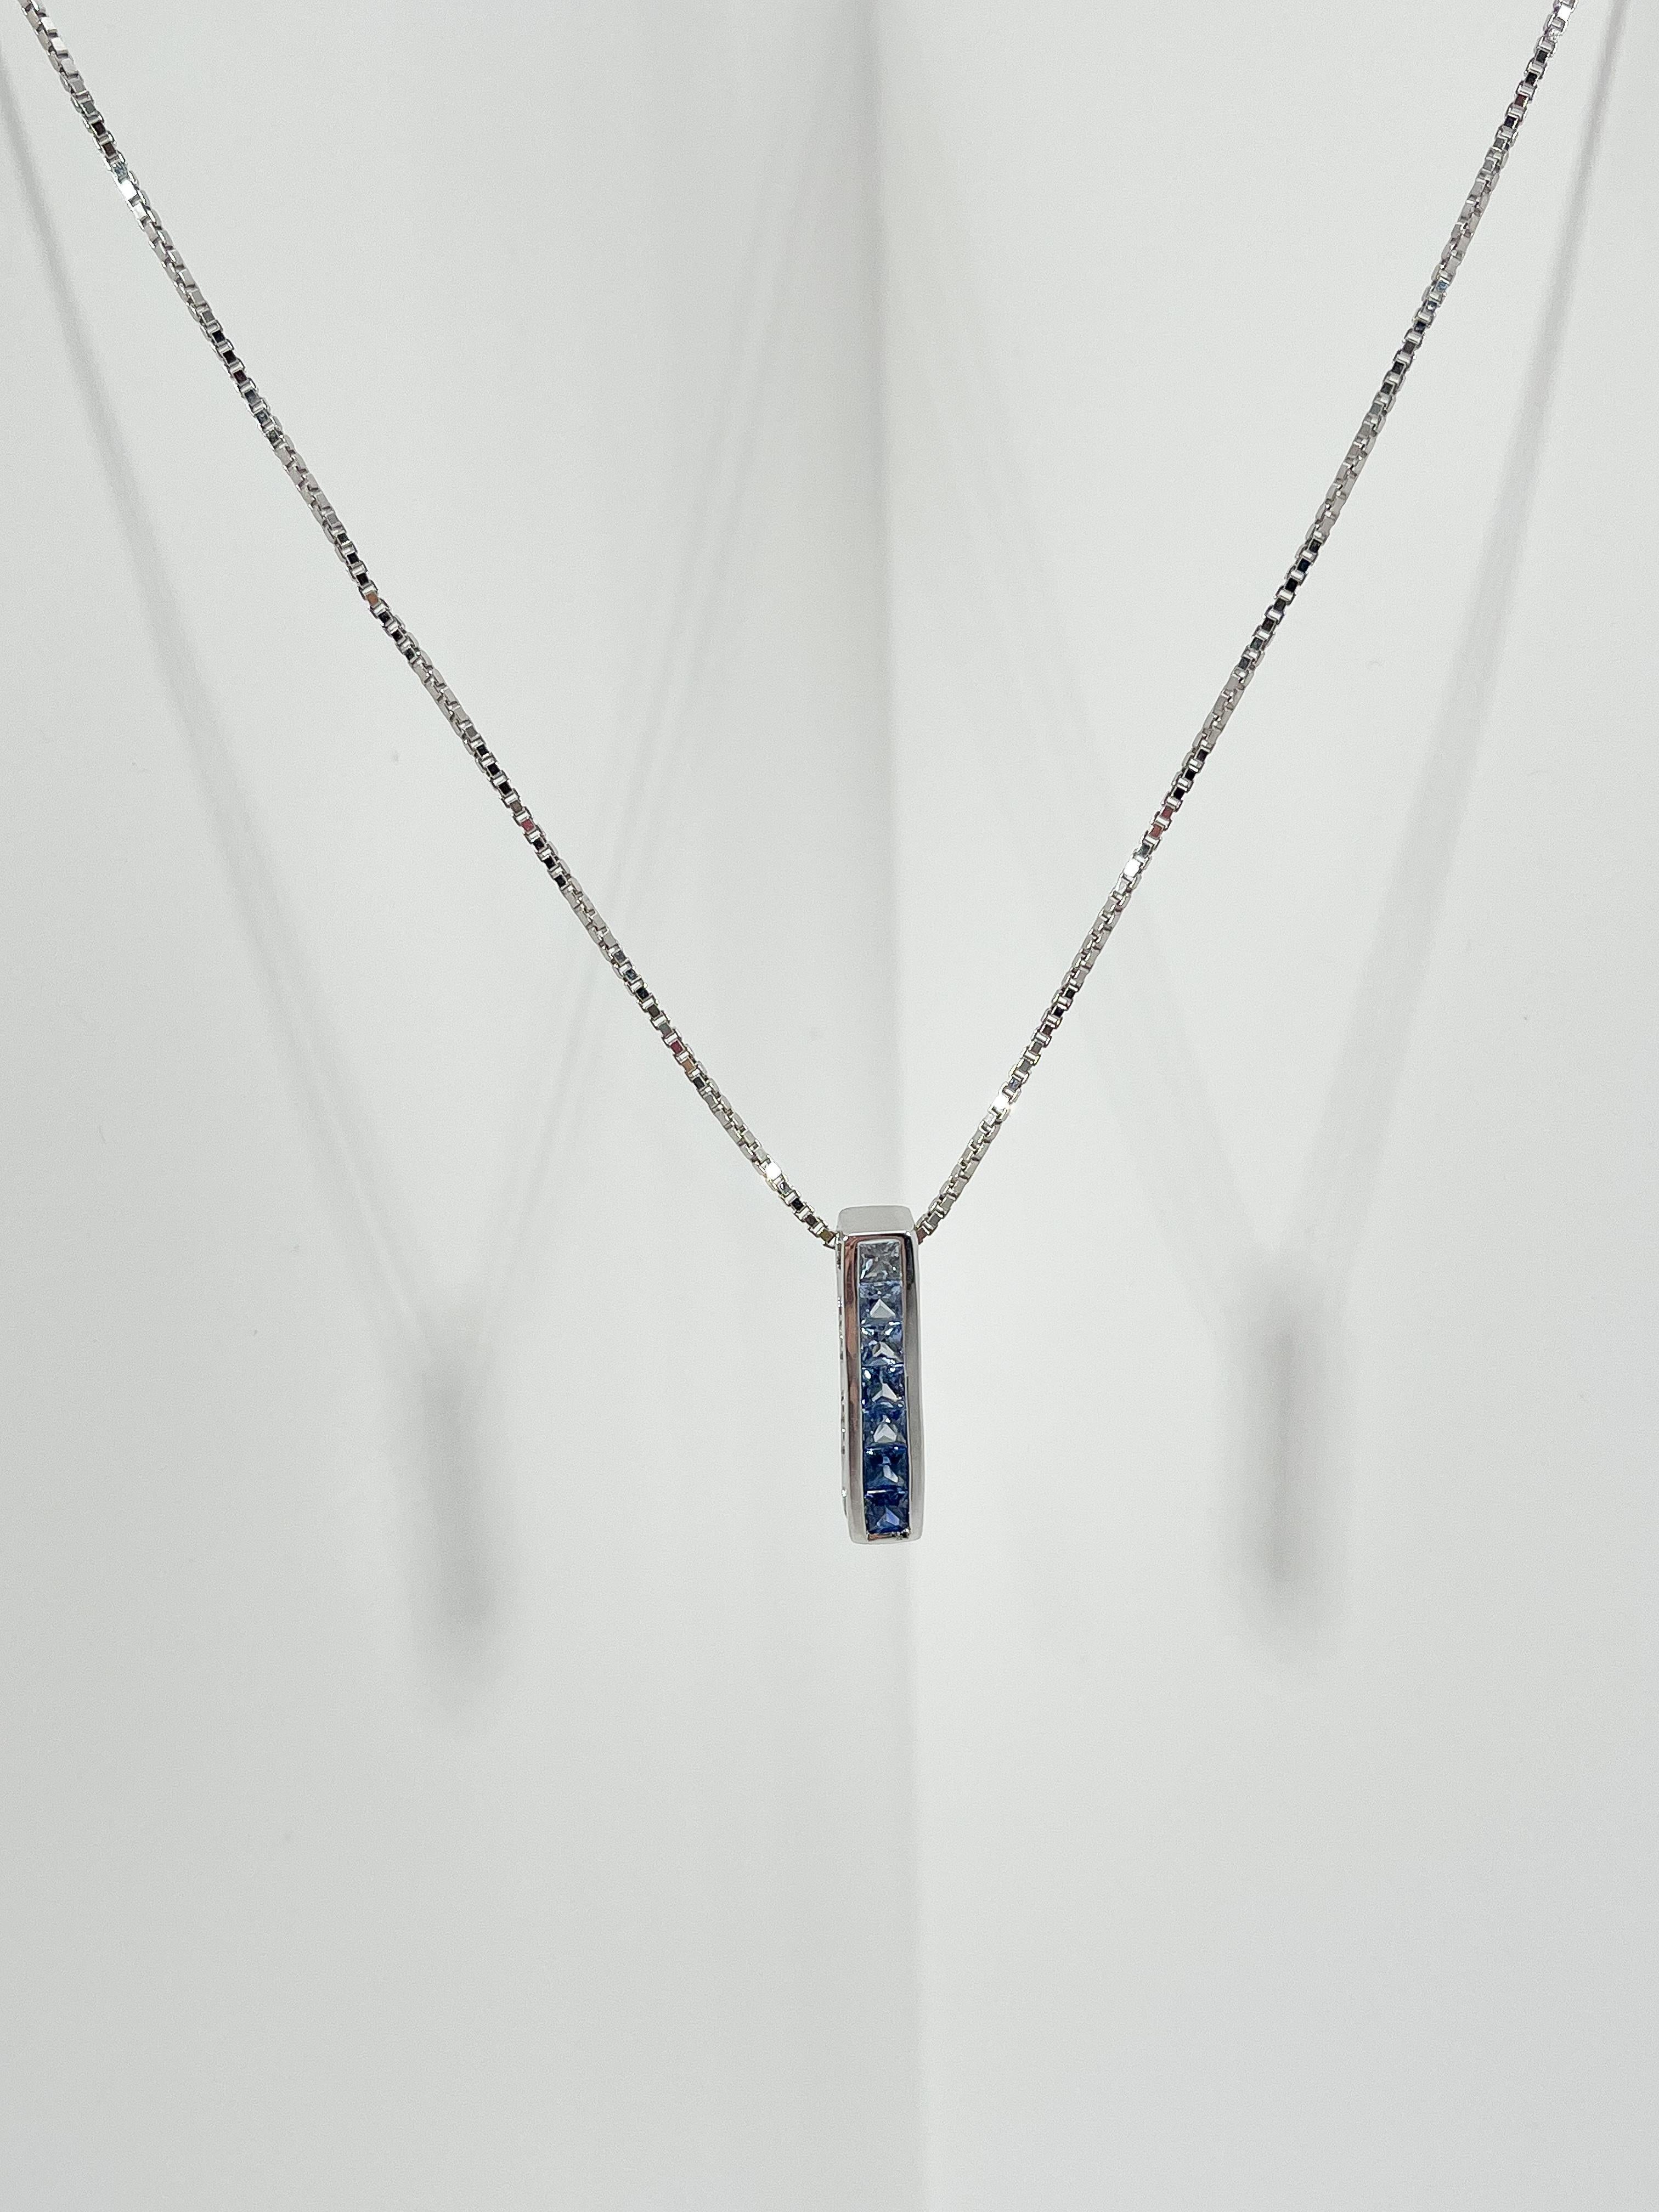 14k white gold gradient blue sapphire pendant necklace. 7 sapphires, all different colors going from lightest to darkest, all stones are princess cut. The pendant comes on a box chain and the chain is 18 inches in length. The pendant measures 18.7 x